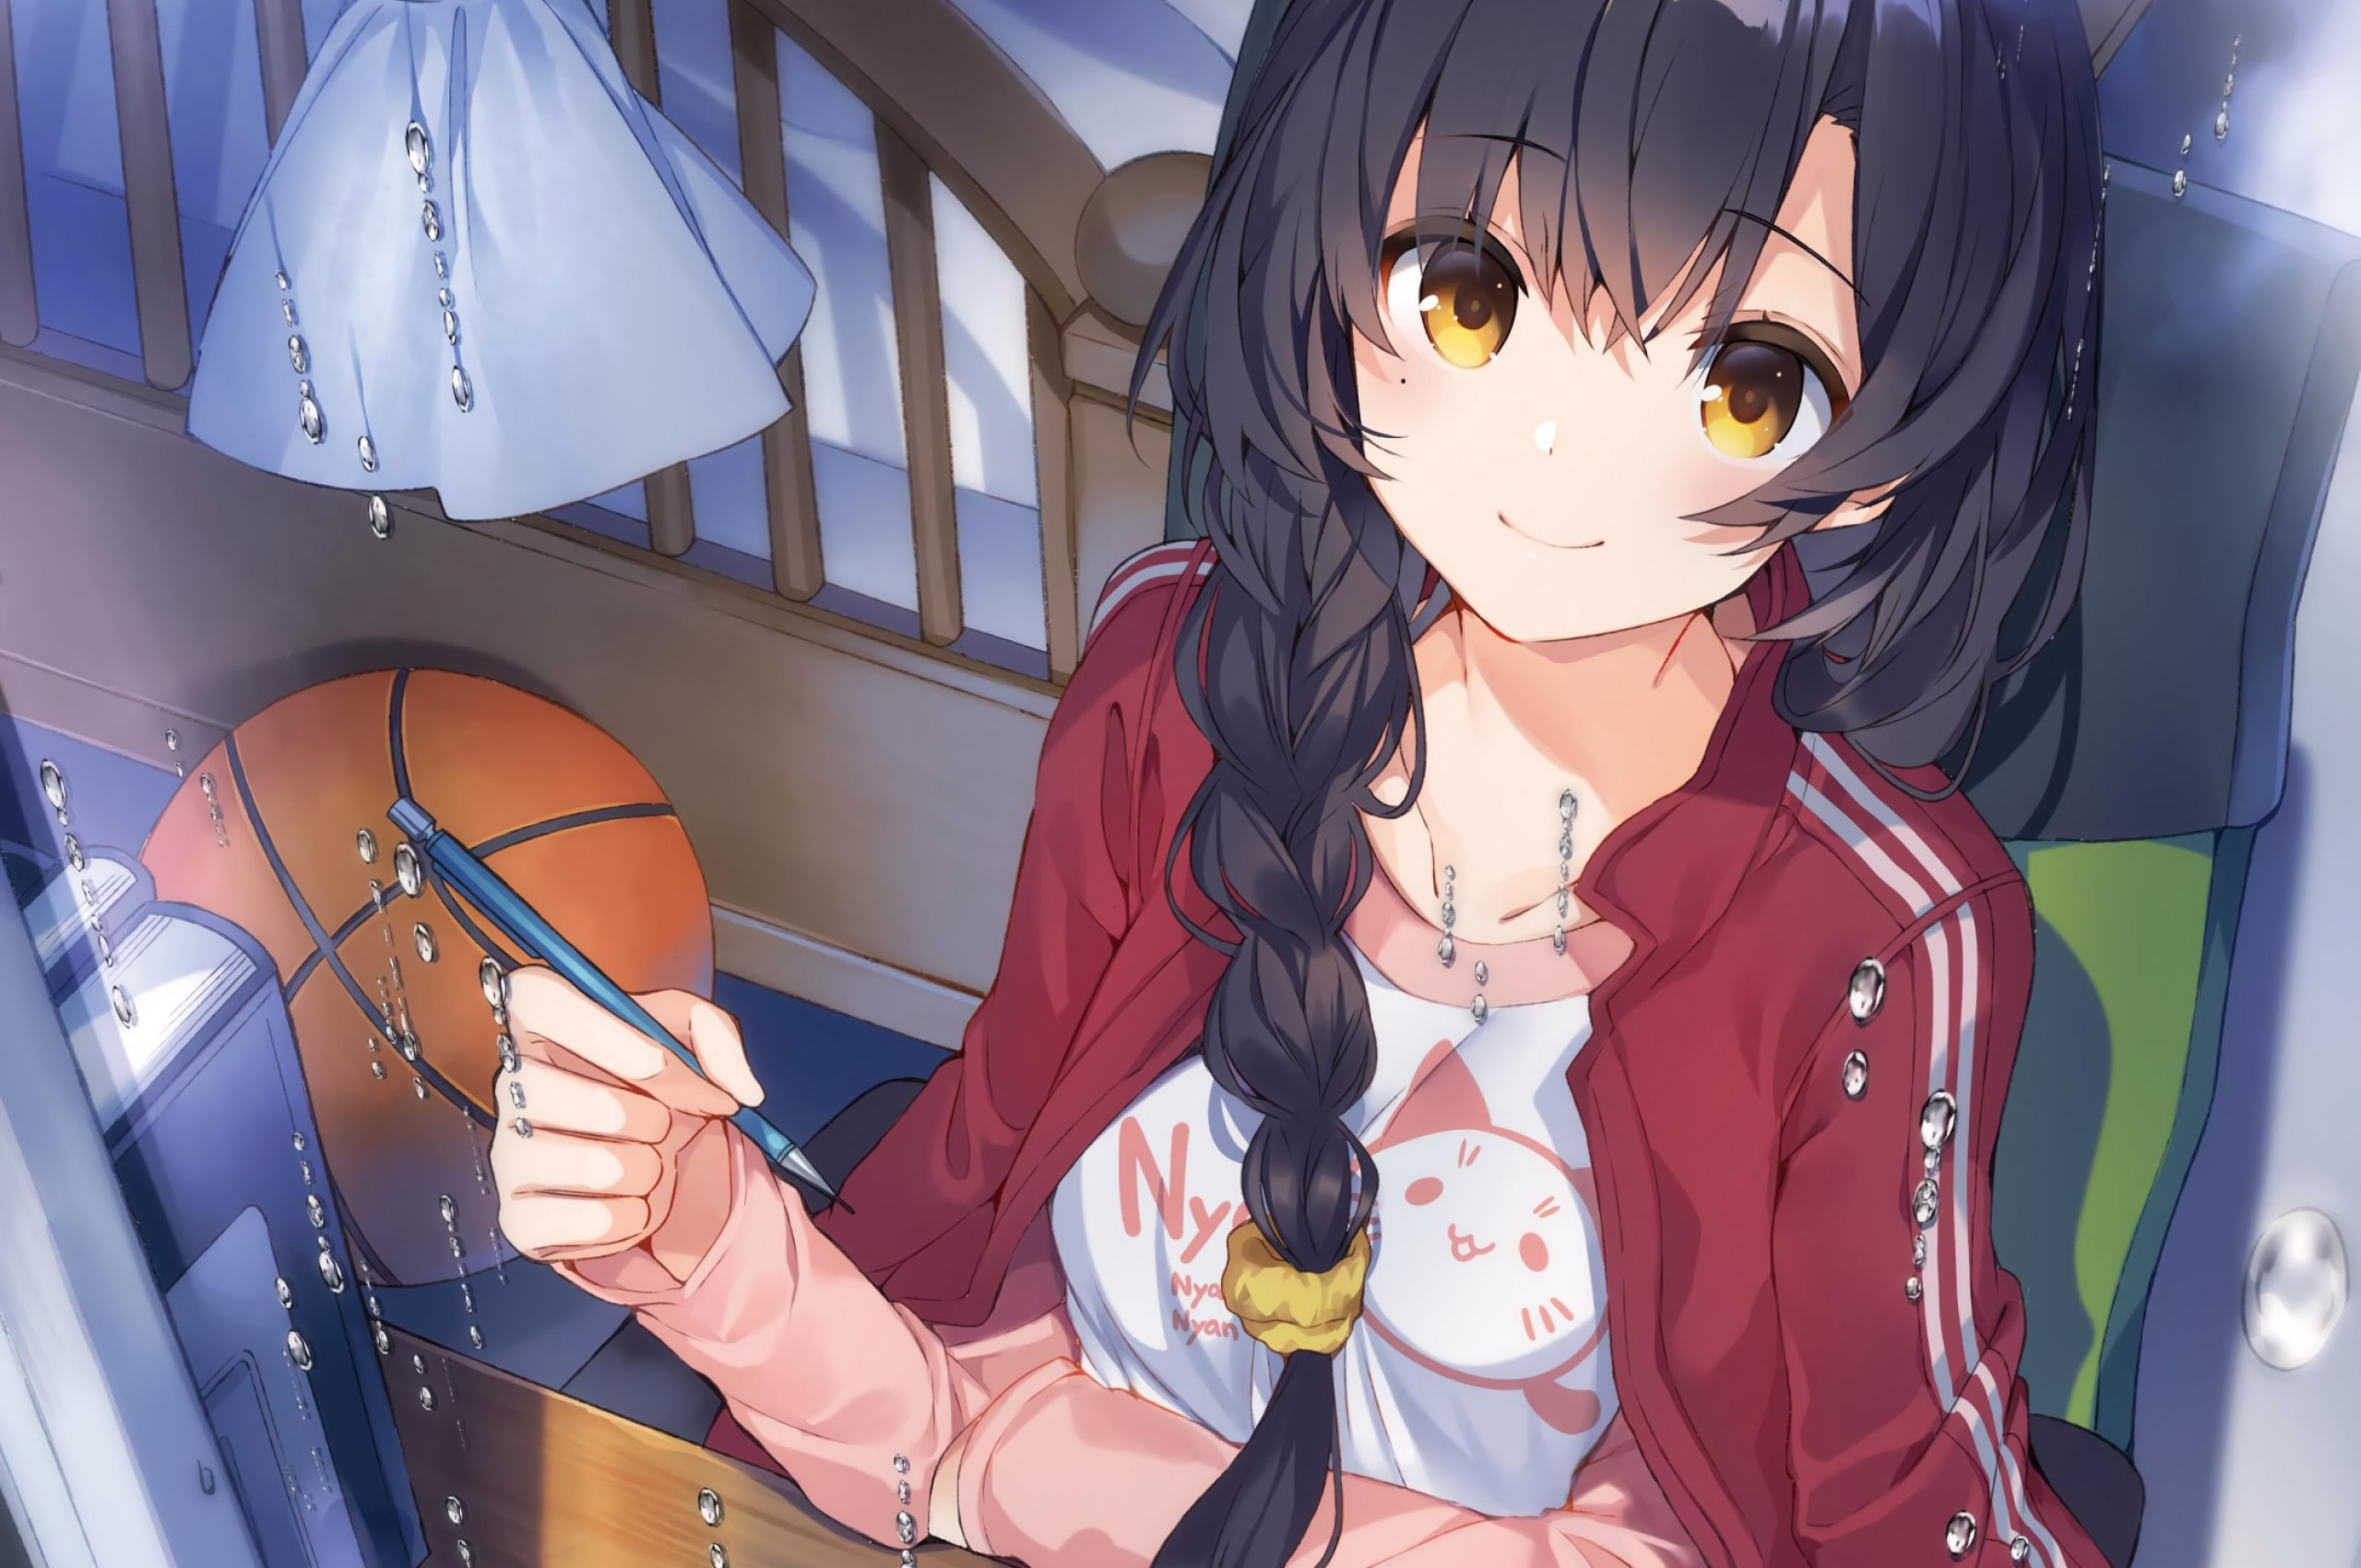 Download 2560x1700 Cute Anime Girl, Braid, Studying, Jacket, Basketball Wallpaper for Chromebook Pixel